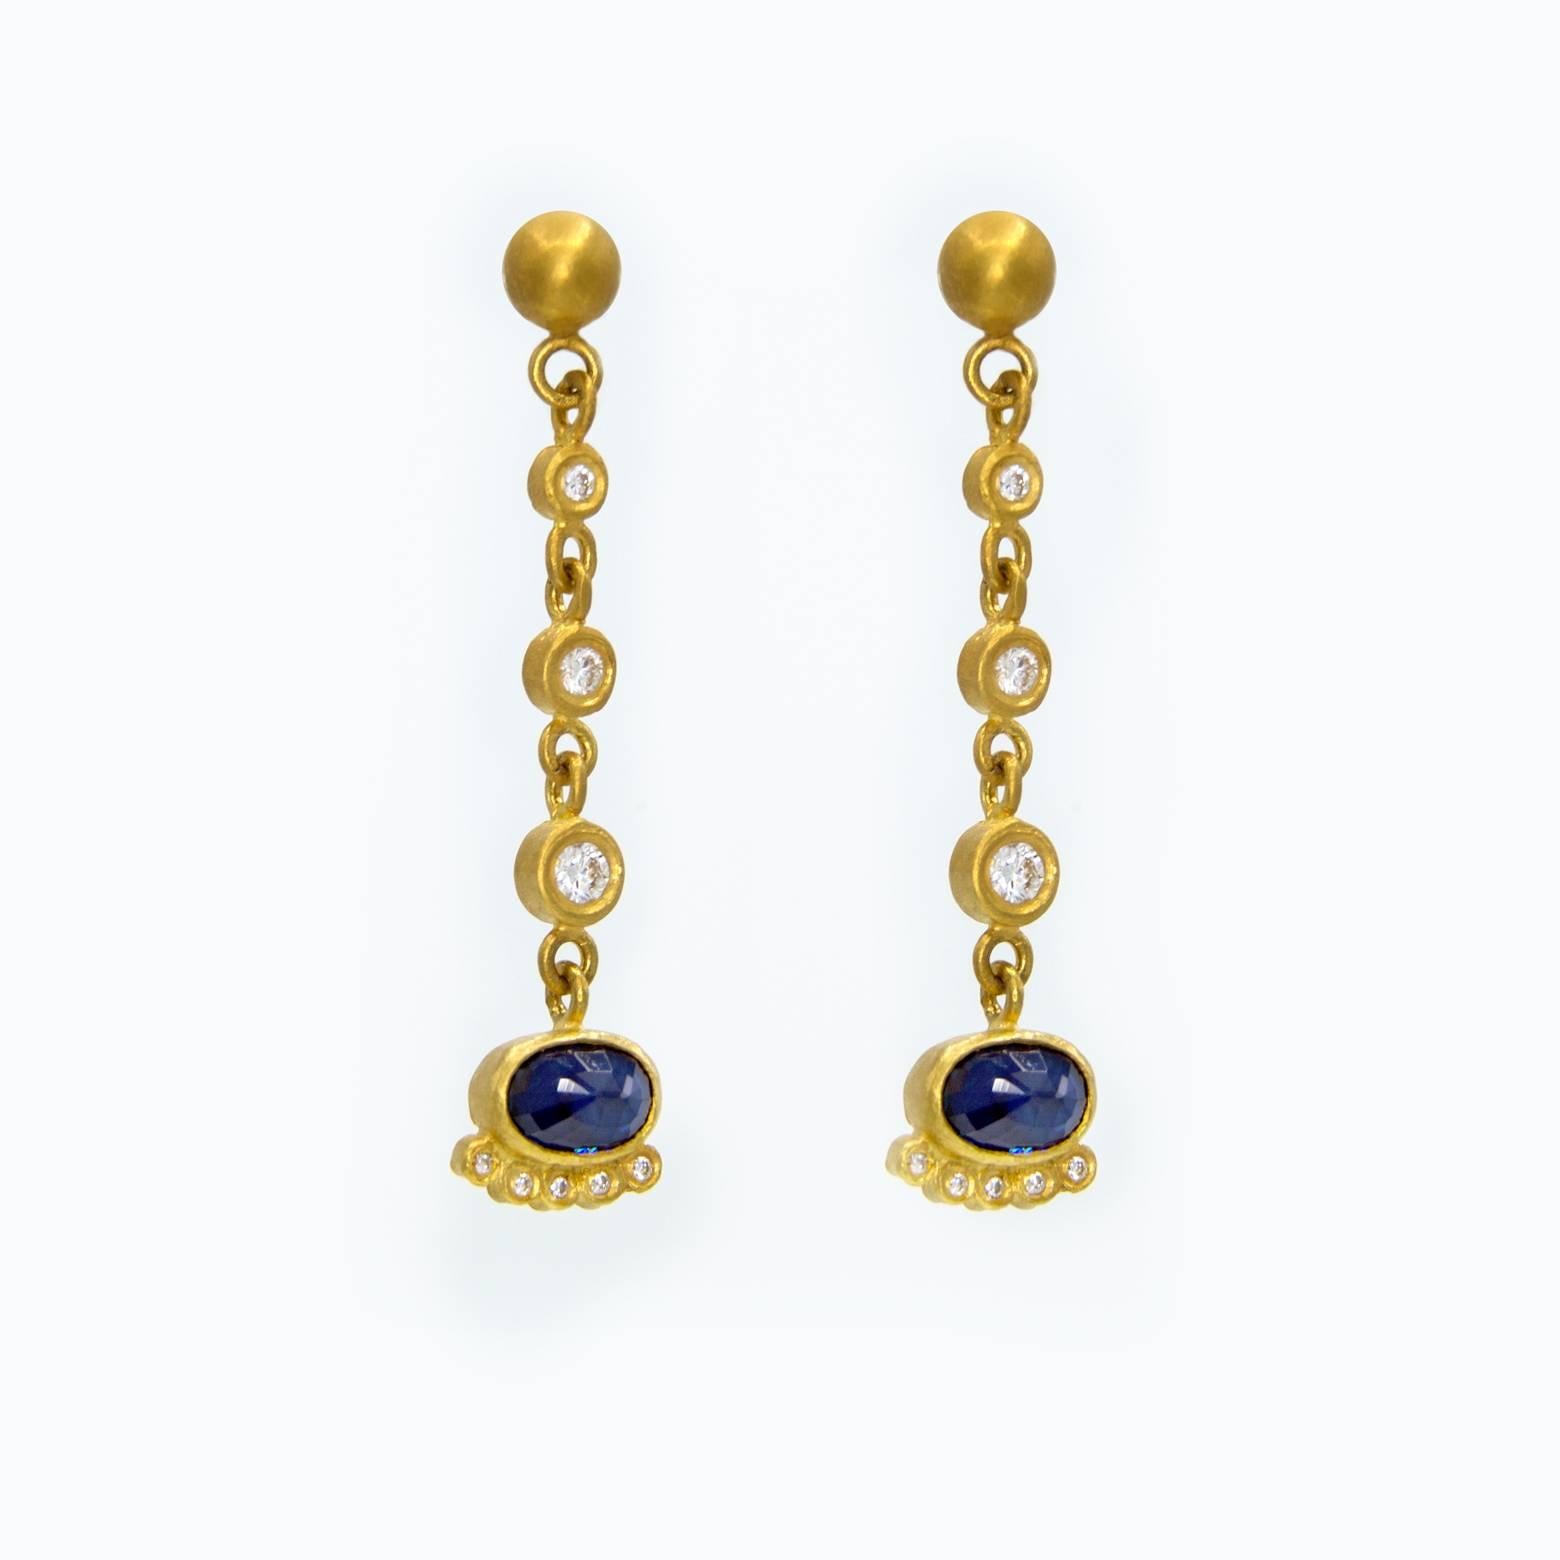 Sapphires, diamonds and gold. Elegant and refined, yet fun. These earrings have such a unique design to them that you'll want to wear them as often as you can. Elegant and artistic, playful and professional. The total weight of the diamonds in both